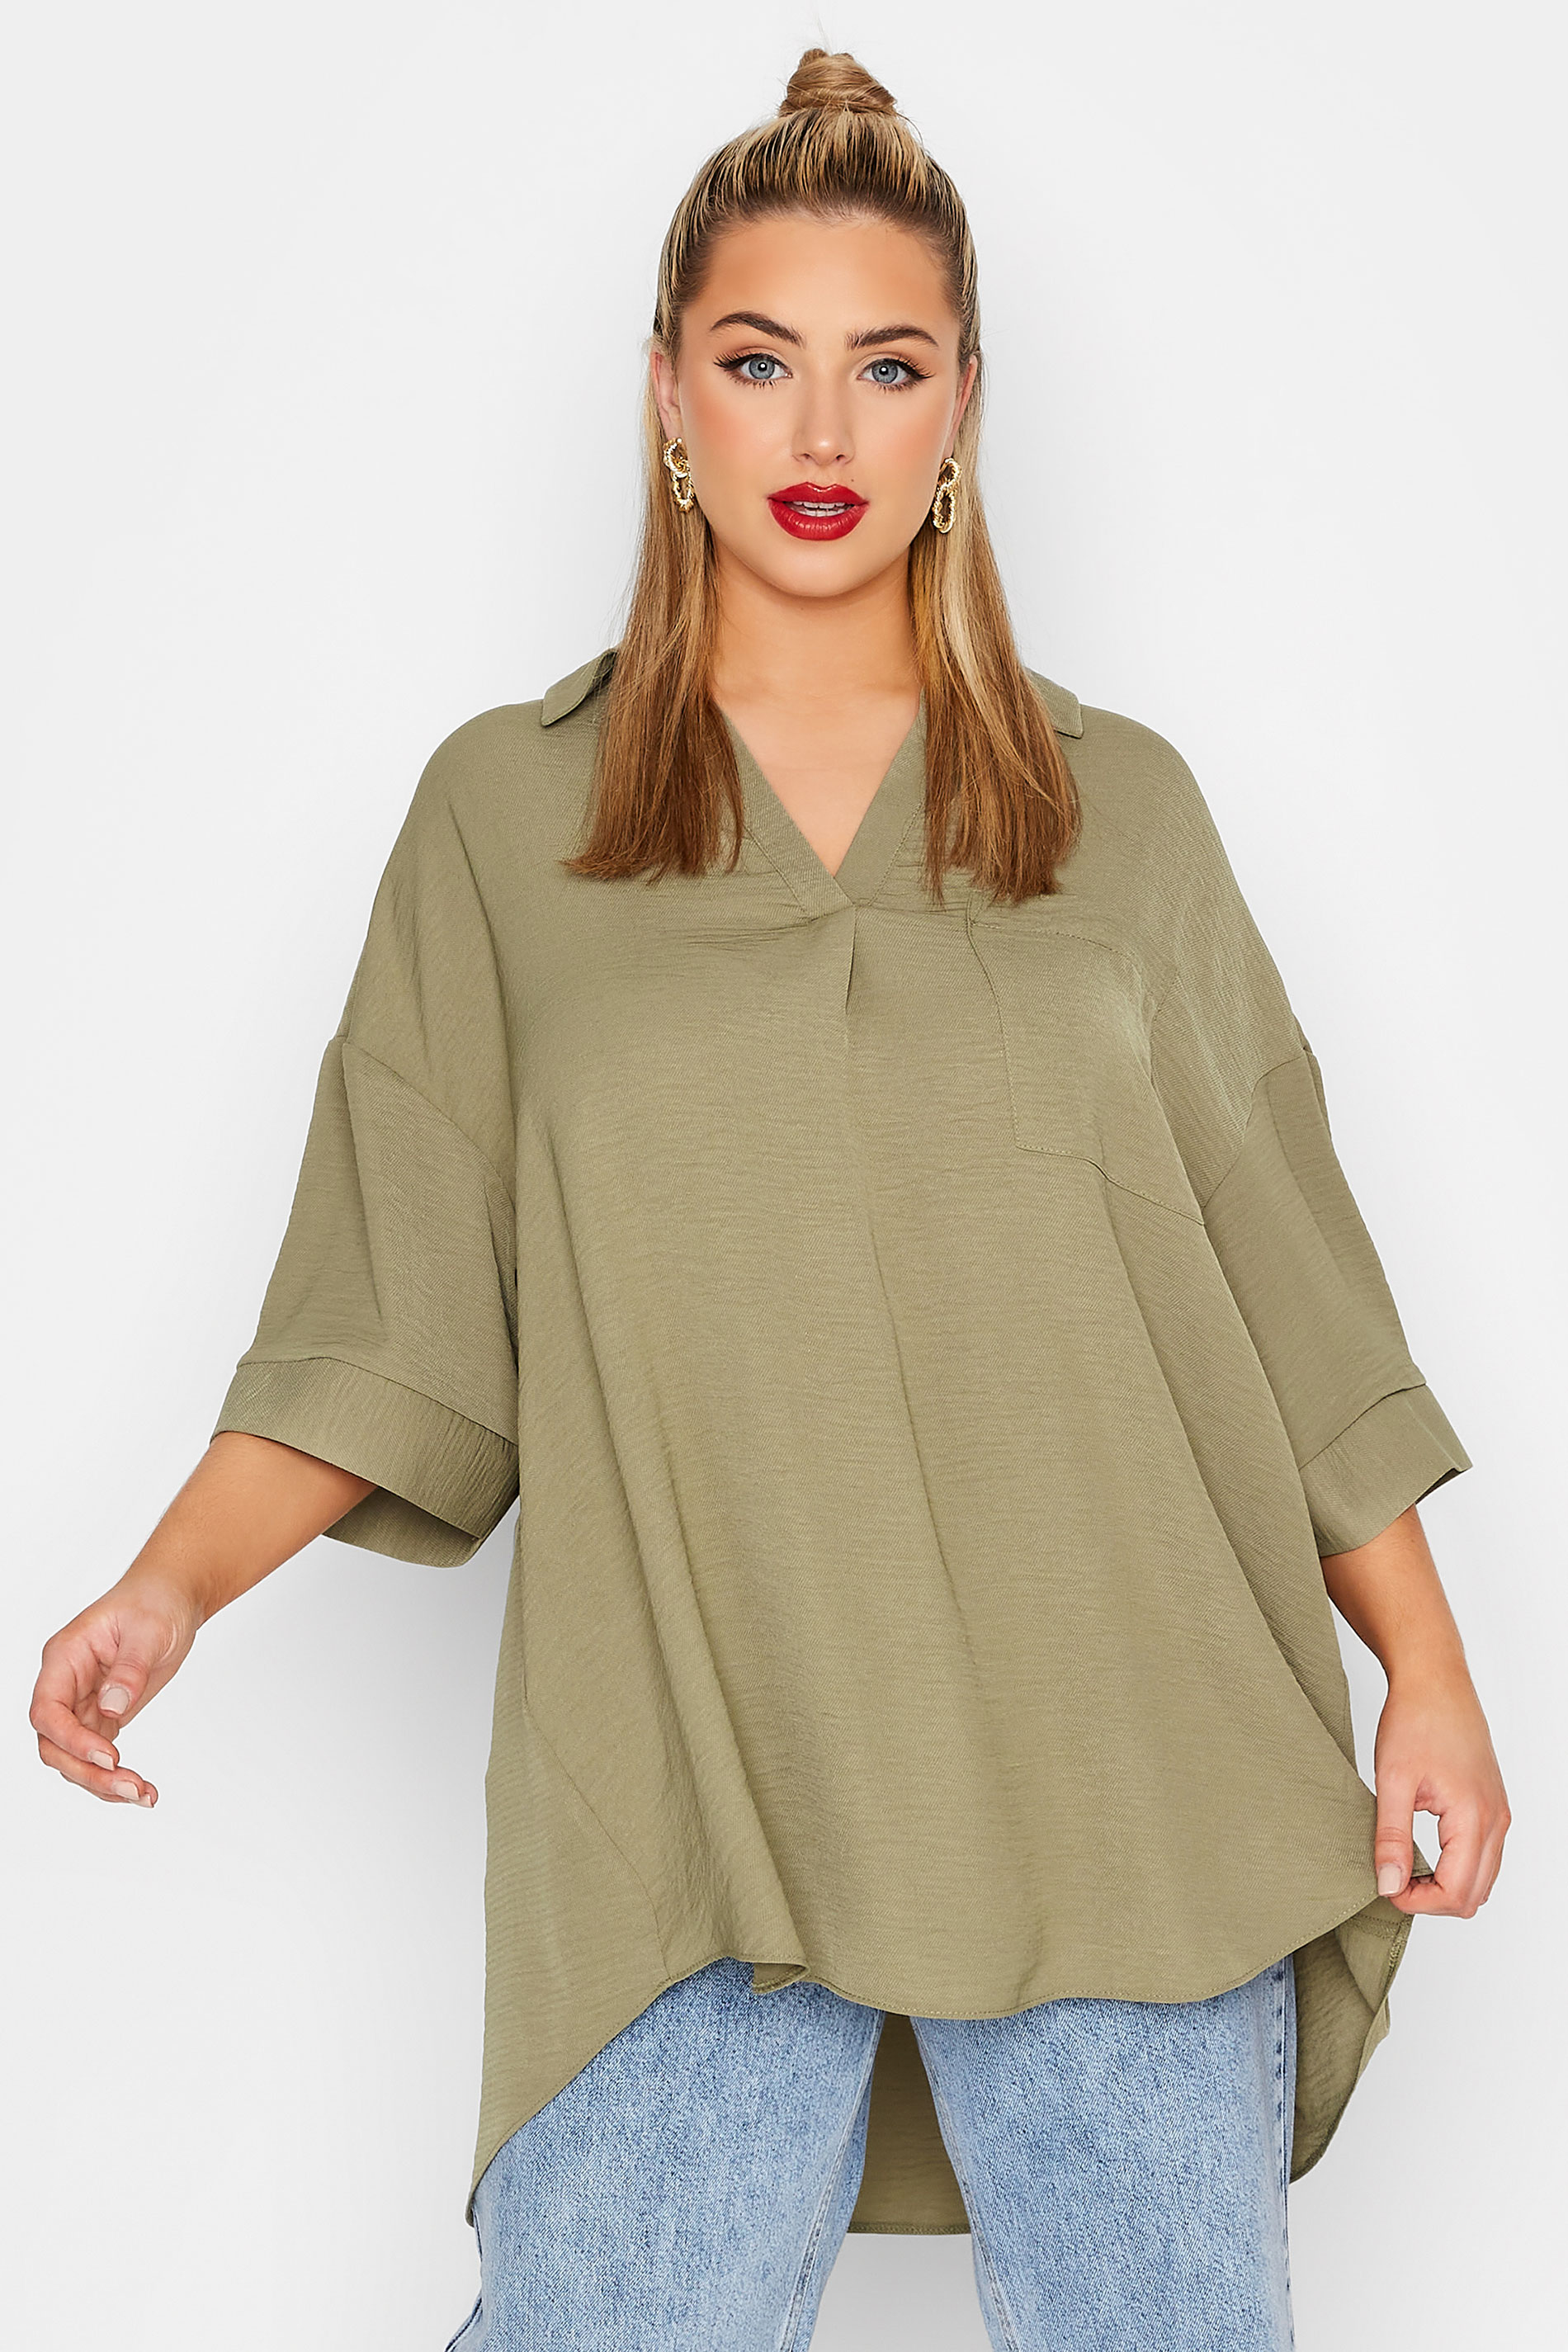 LIMITED COLLECTION Plus Size Olive Green Pleated Front Top | Yours Clothing  1